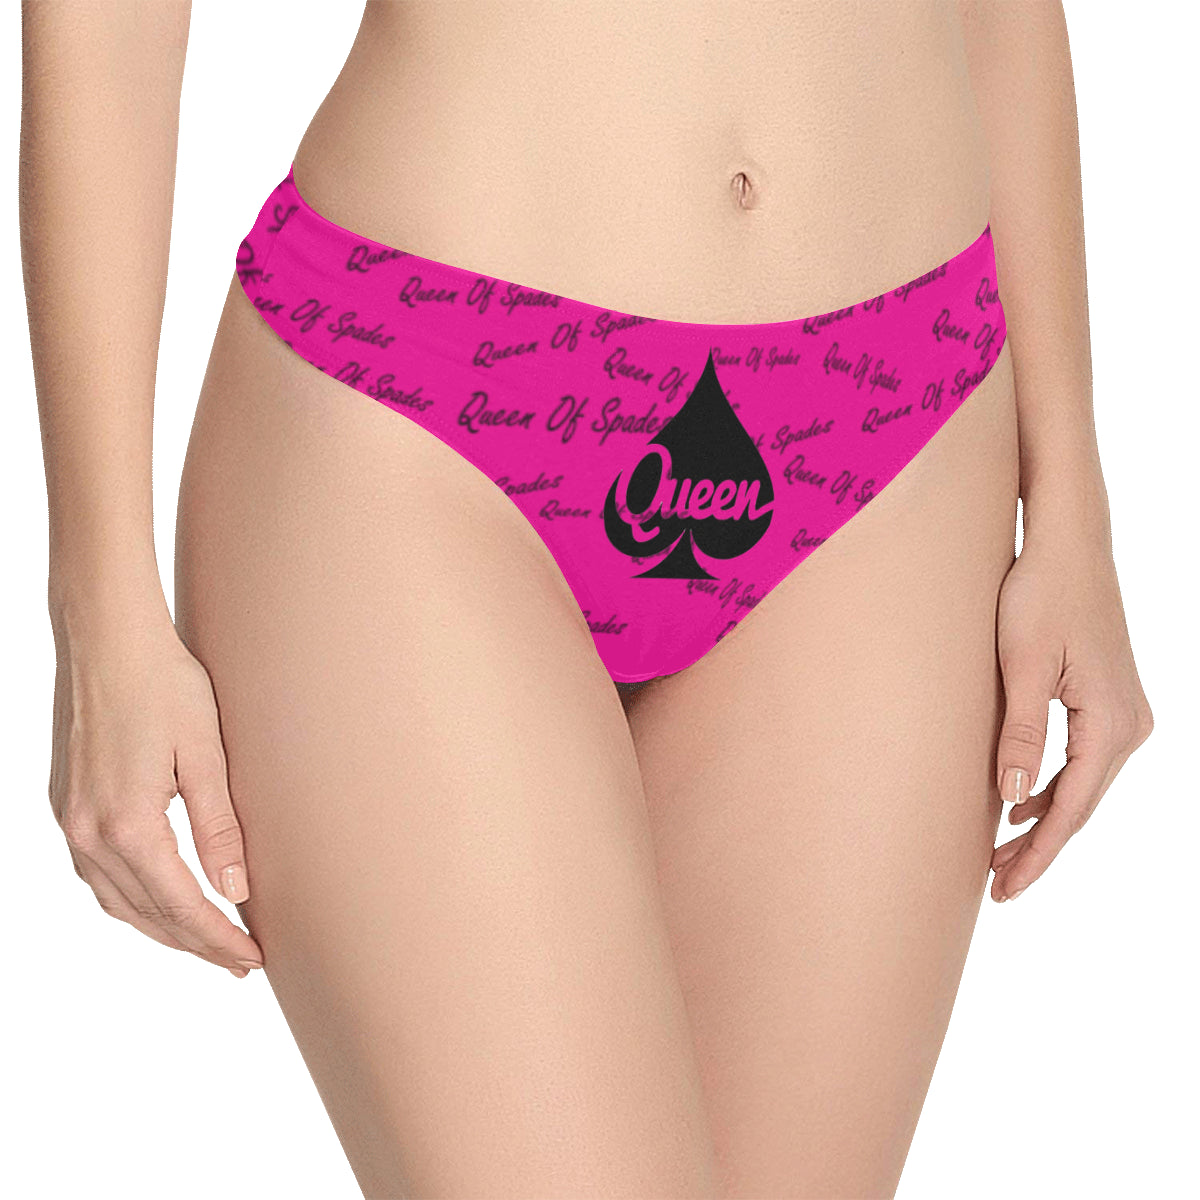  Queen of Spades QoS Thong Panty Spade with Letter Q